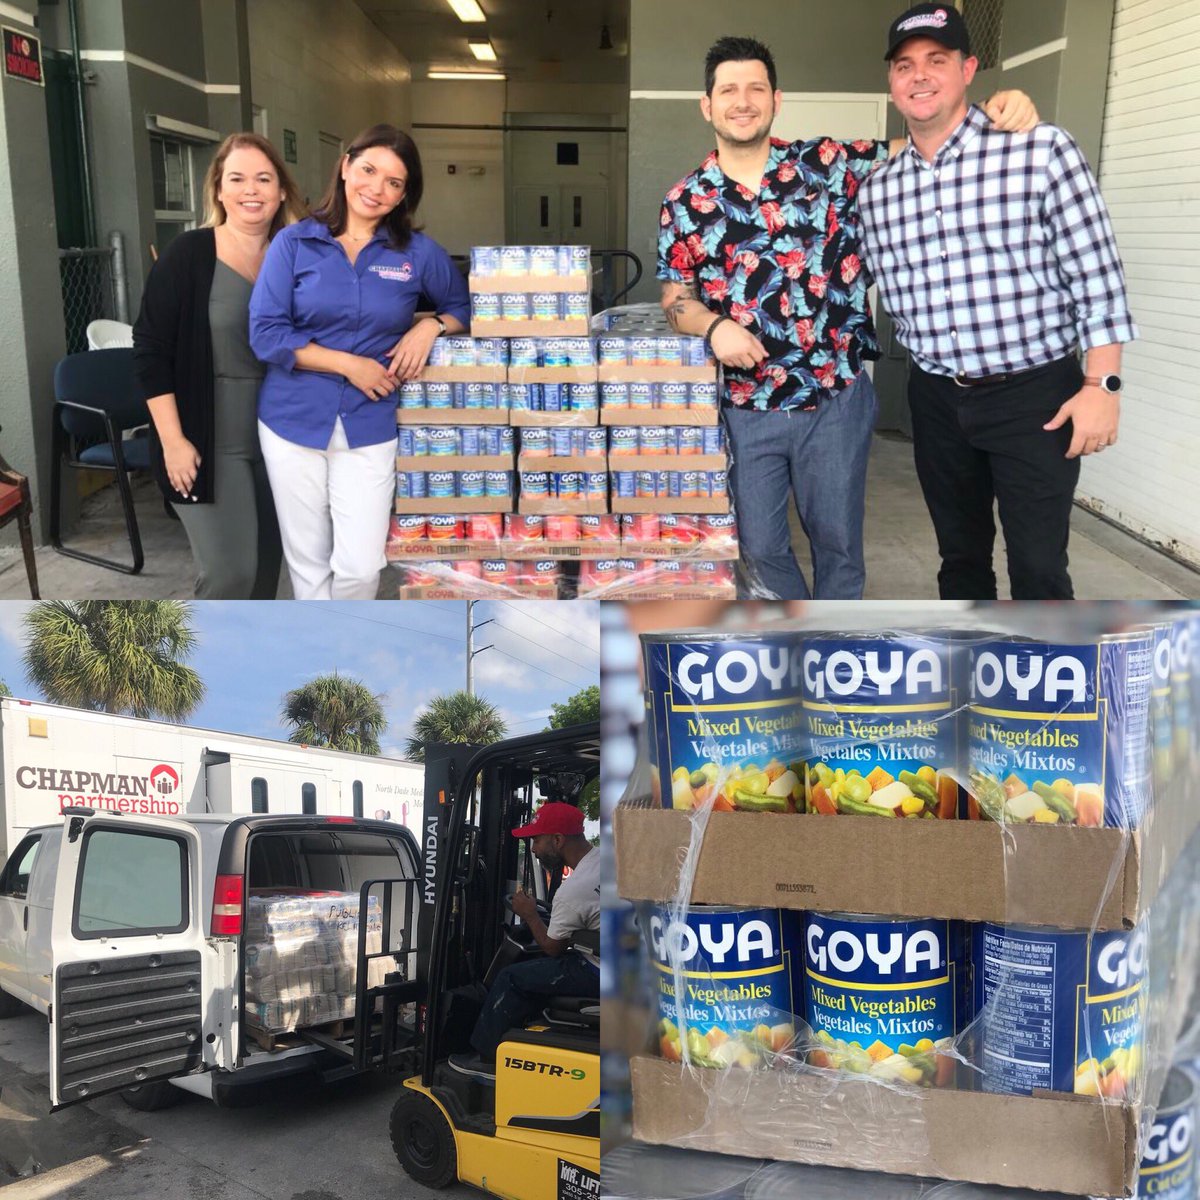 Goya donates 3,000 lbs of Goya products to Chapman Partners in Florida